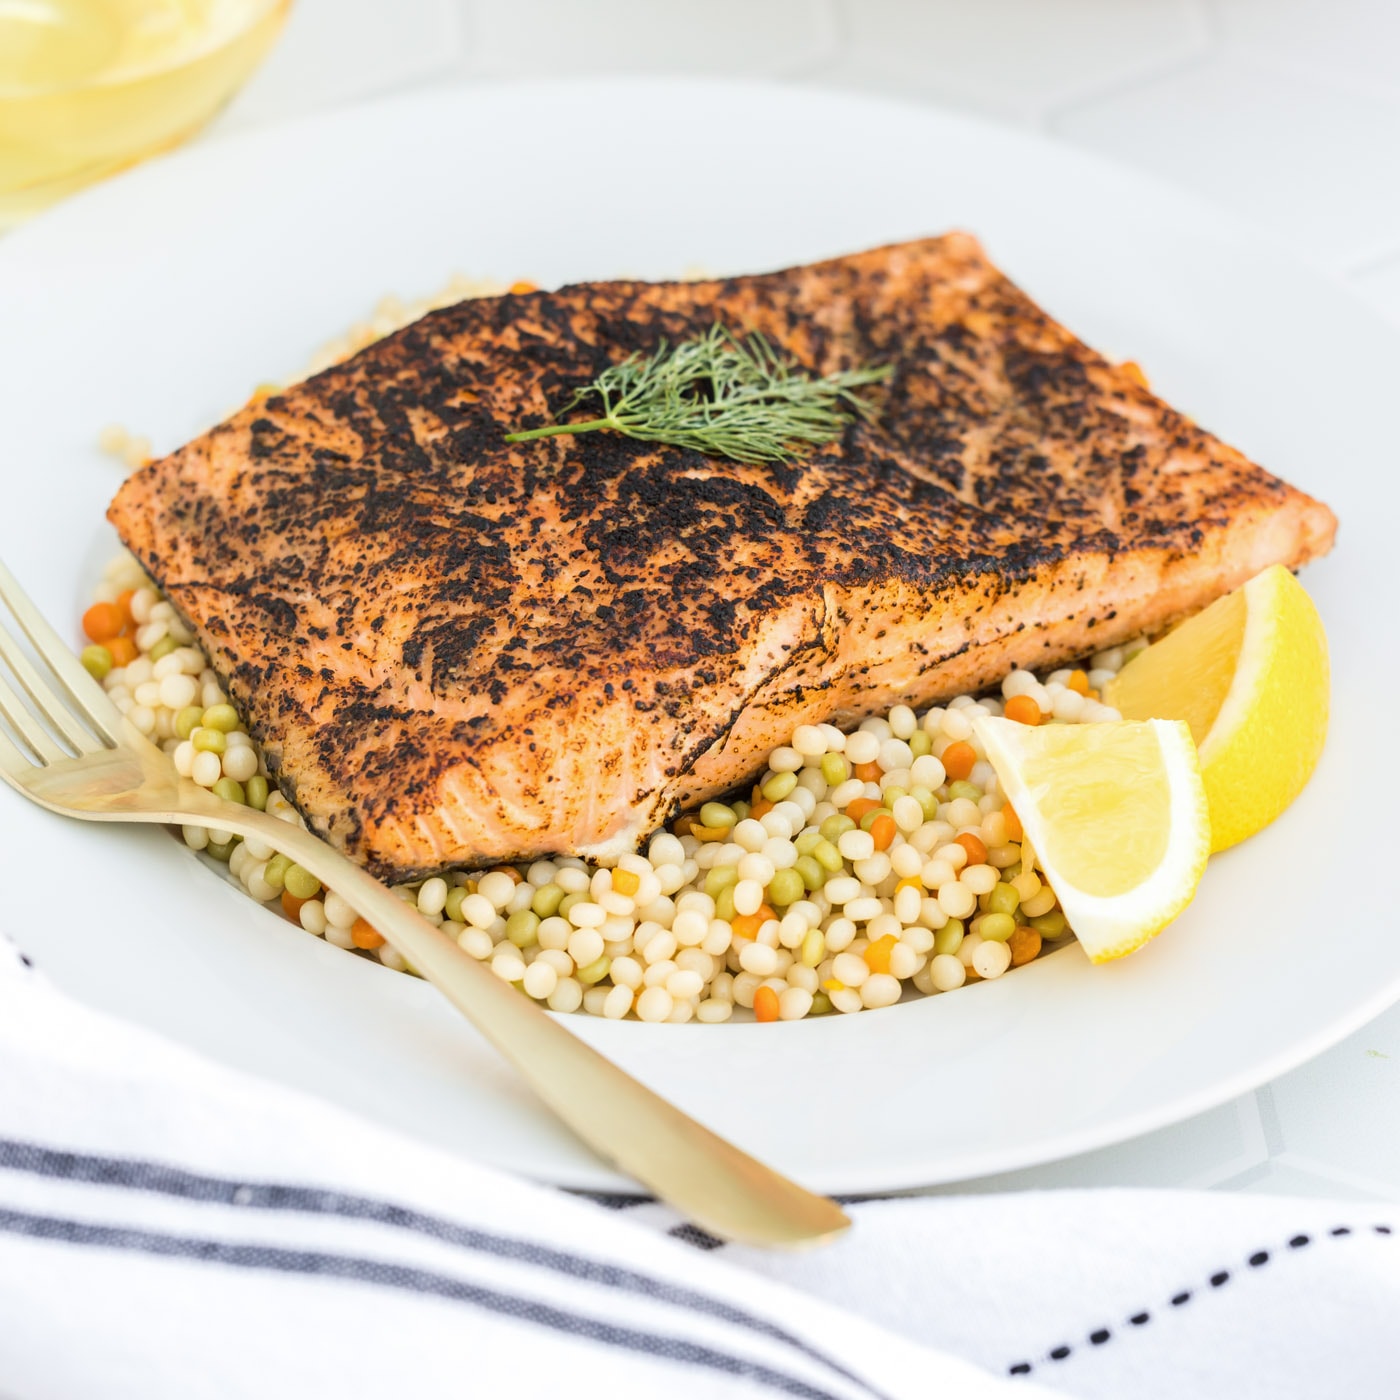 Sous-Vide Salmon - Cookidoo® – the official Thermomix® recipe platform